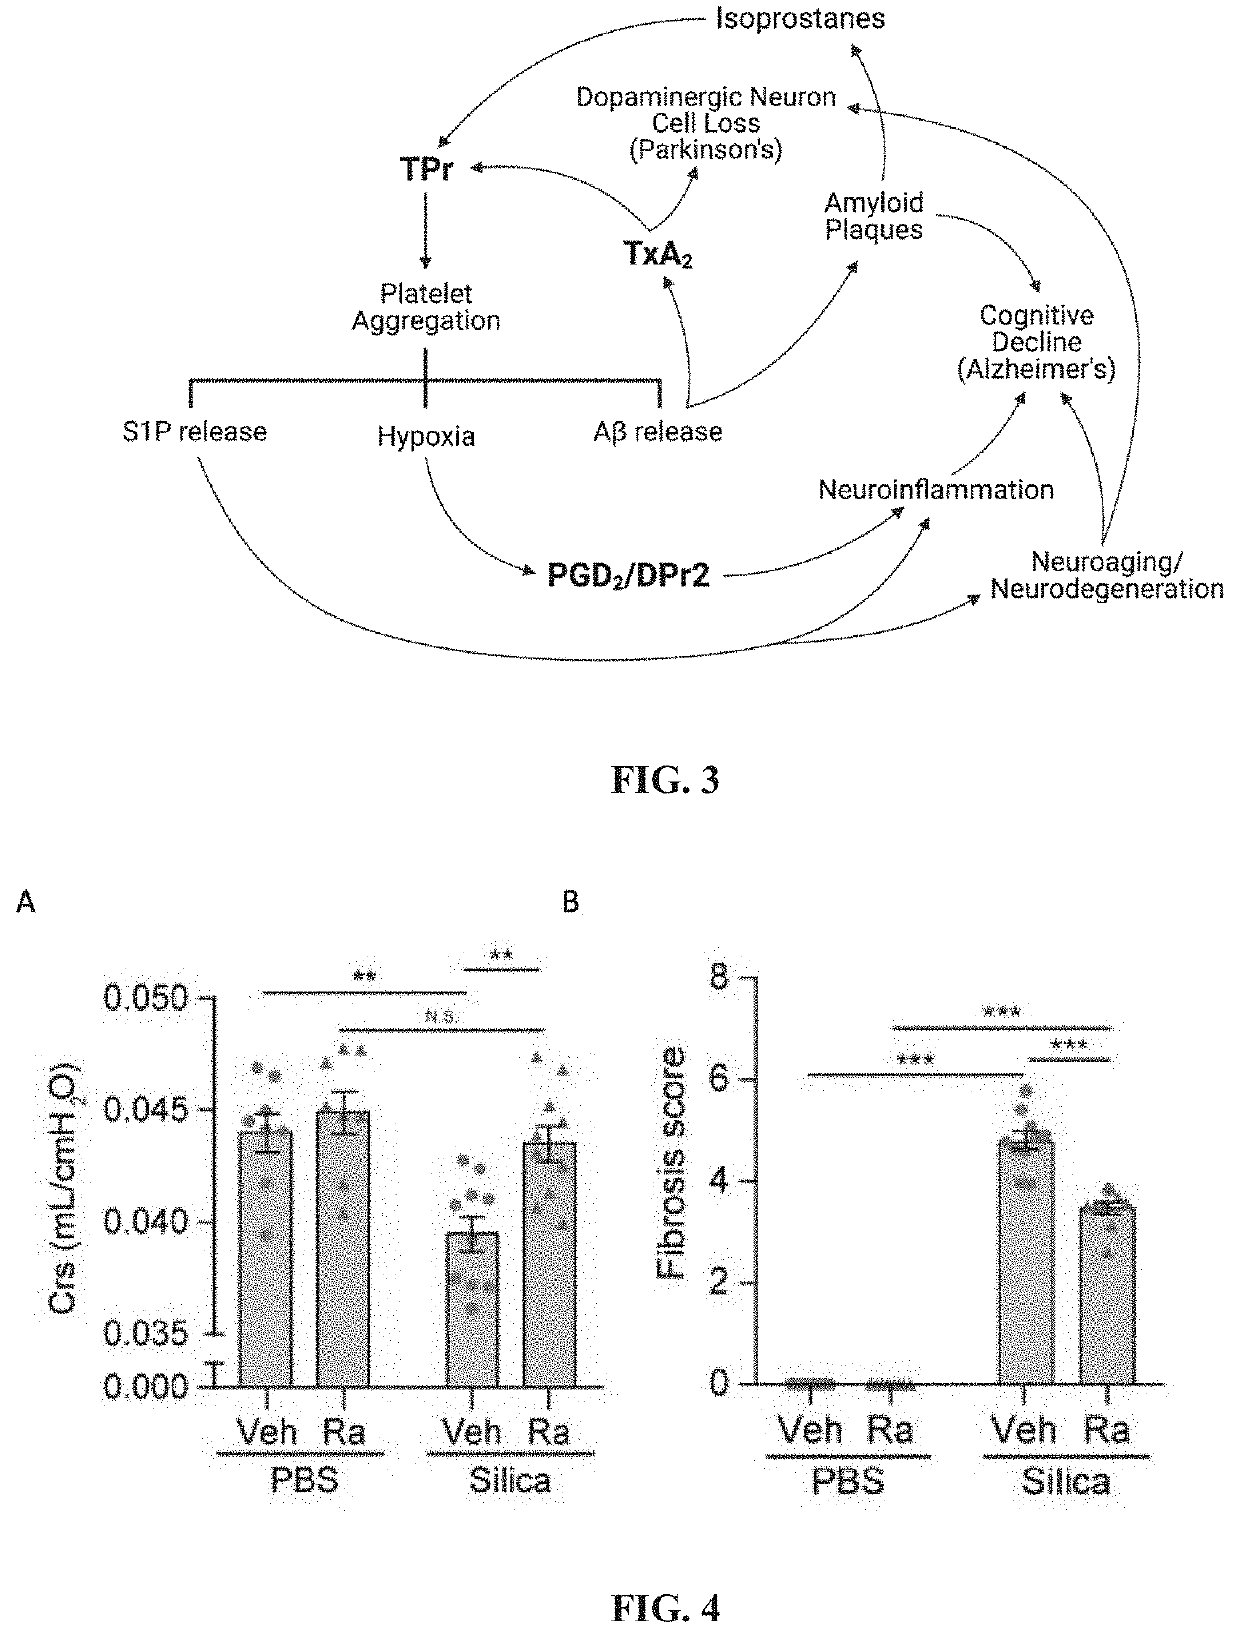 Dual antagonist of pgd2/dpr2 and thromboxane a2/tpr receptors and use for treatment of maladaptive immune response or thrombotic diathesis